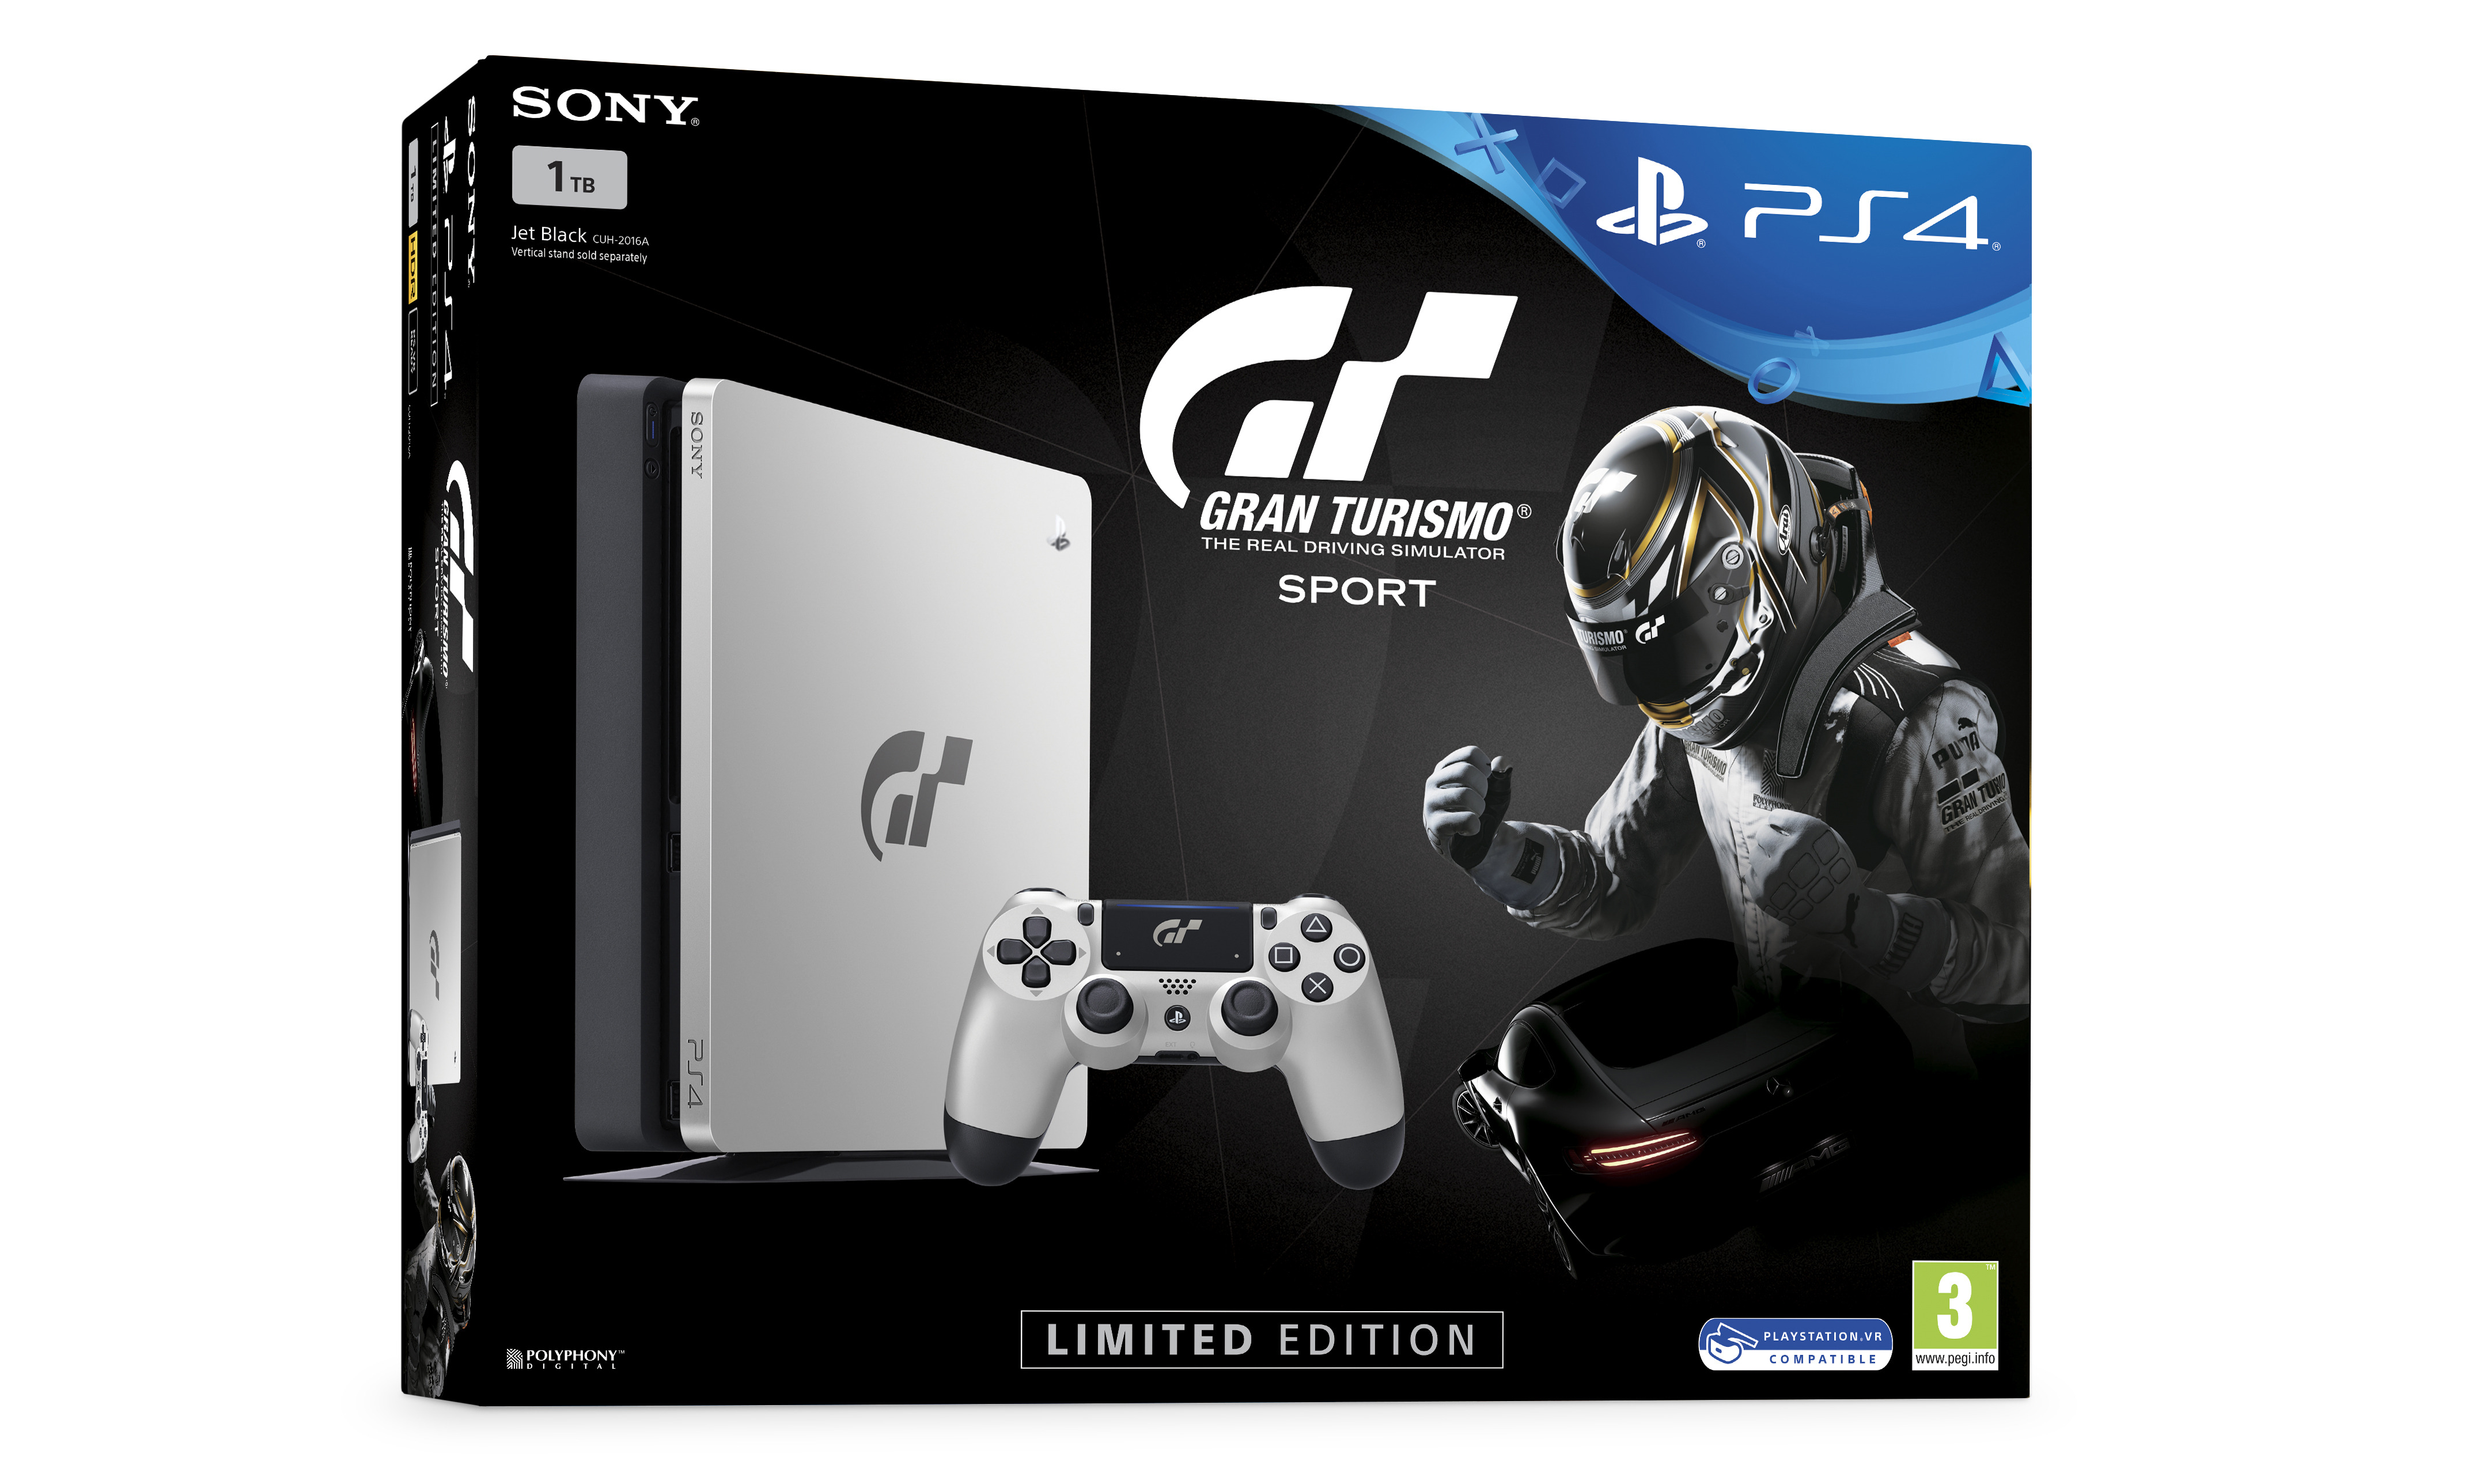 New PS4 Special Edition Features Gran Turismo Sport-Inspired